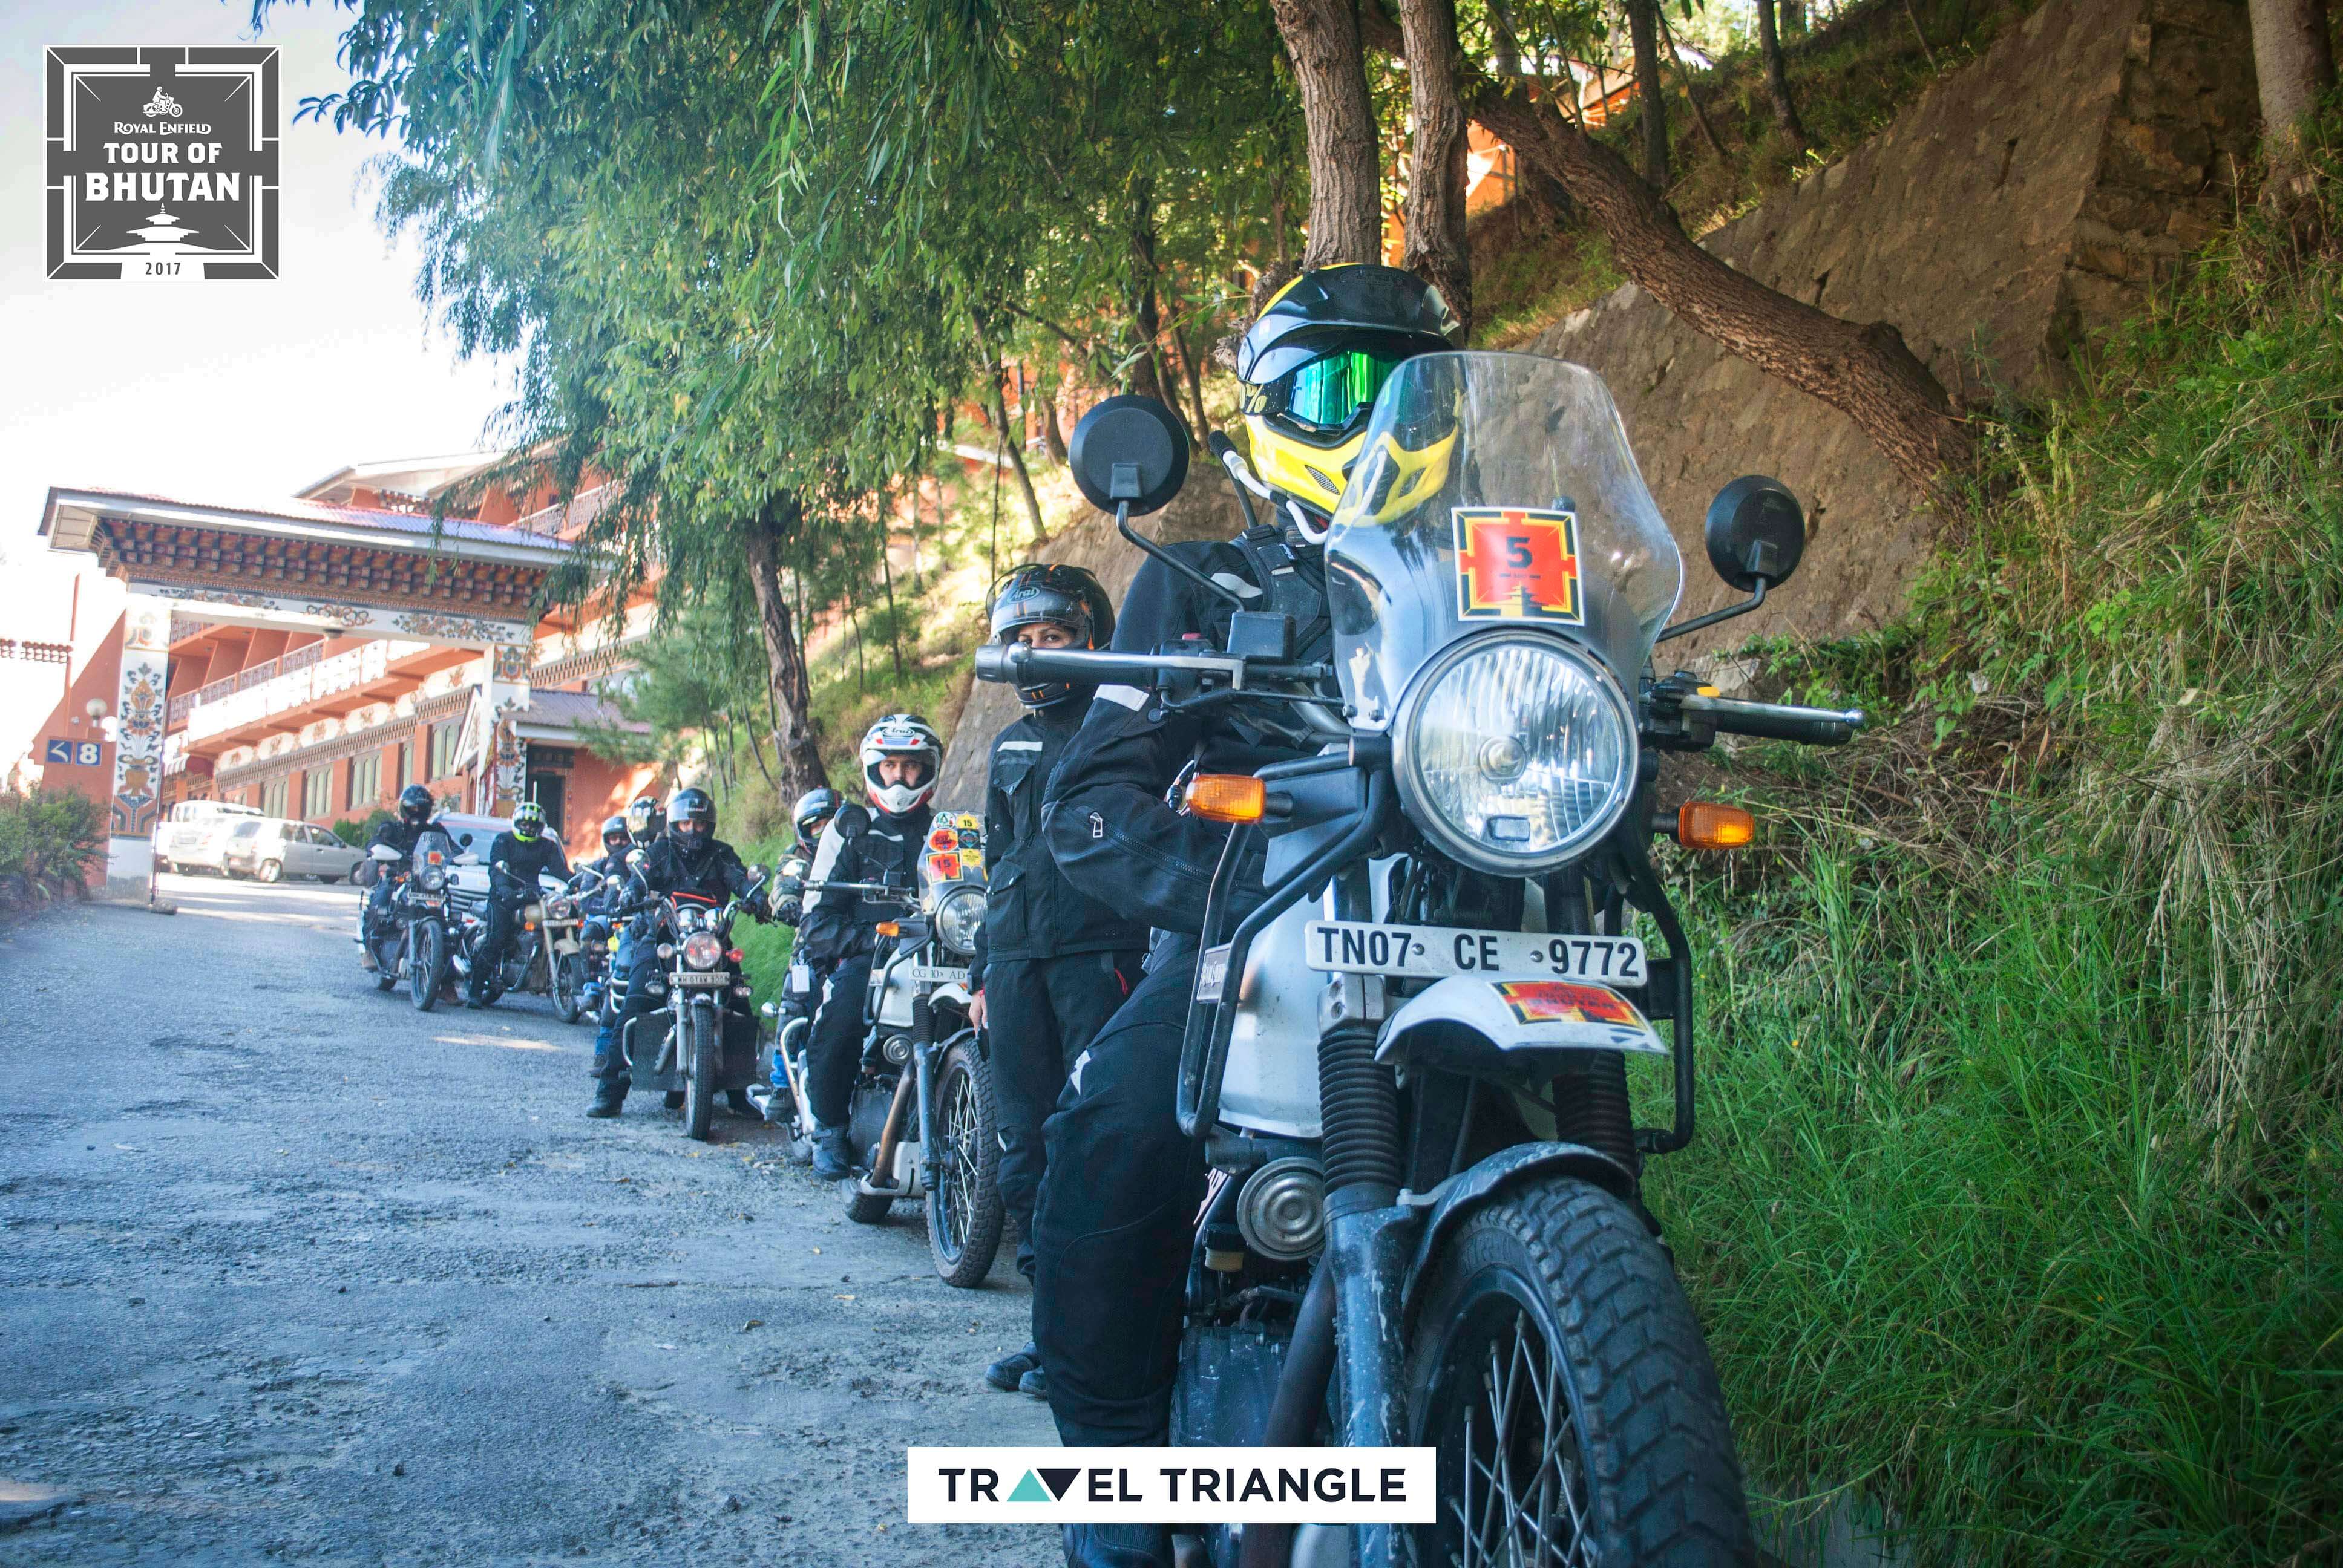 the Royal Enfield Bhutan trip group going from Thimphu to Punakha